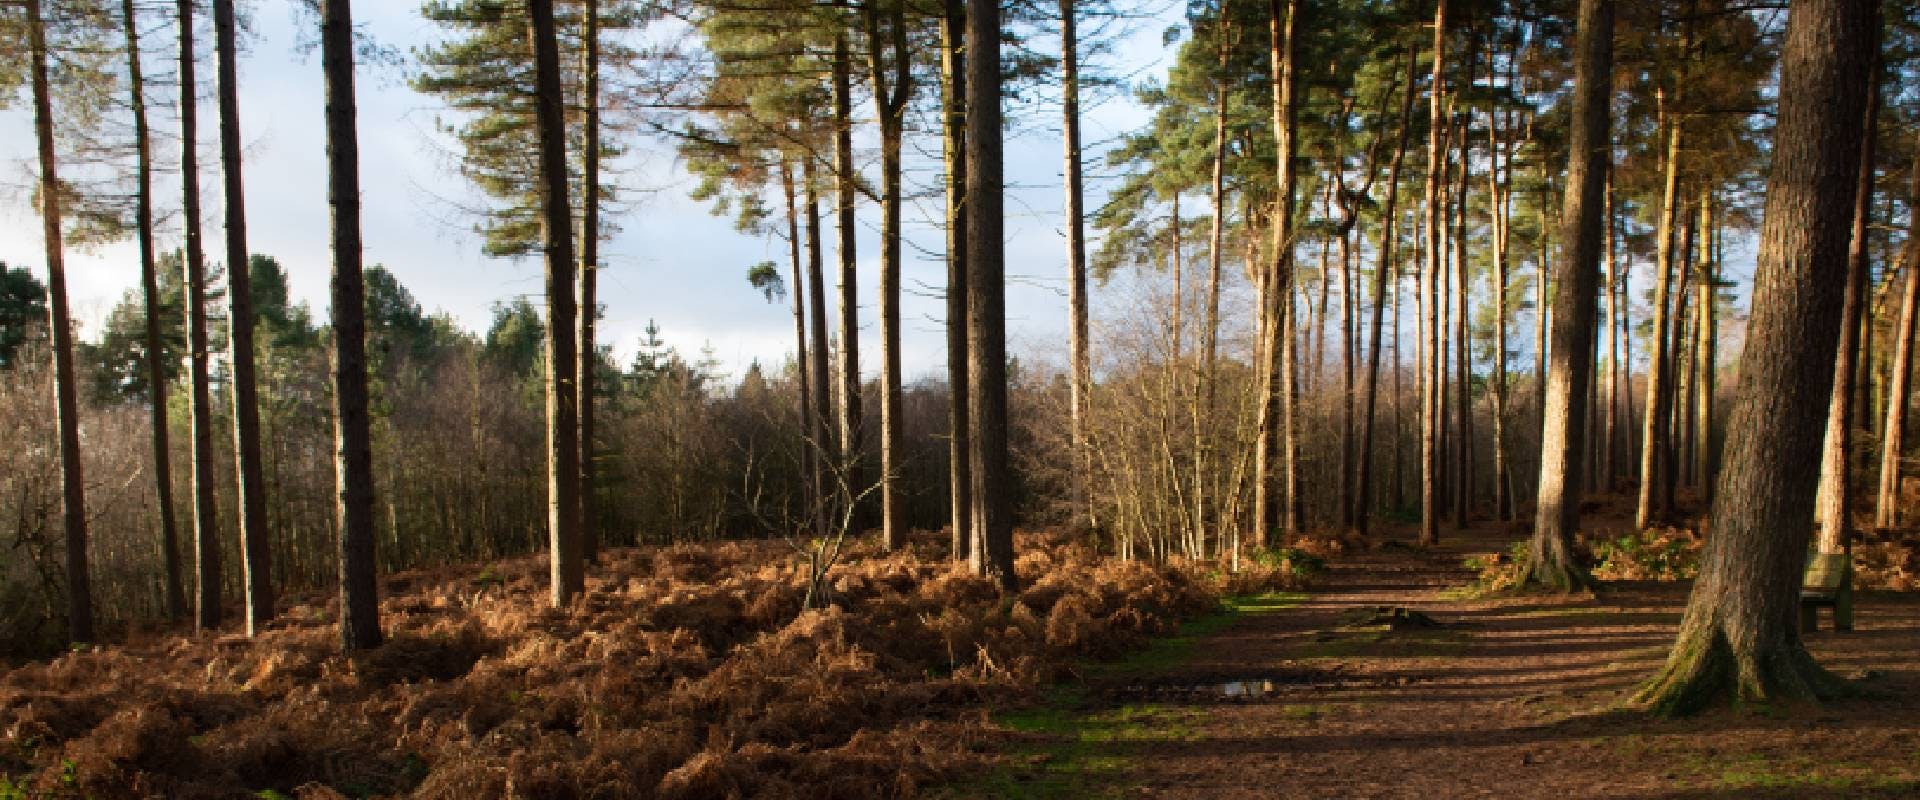 Delamere Forest, a woodland dog walk in Cheshire